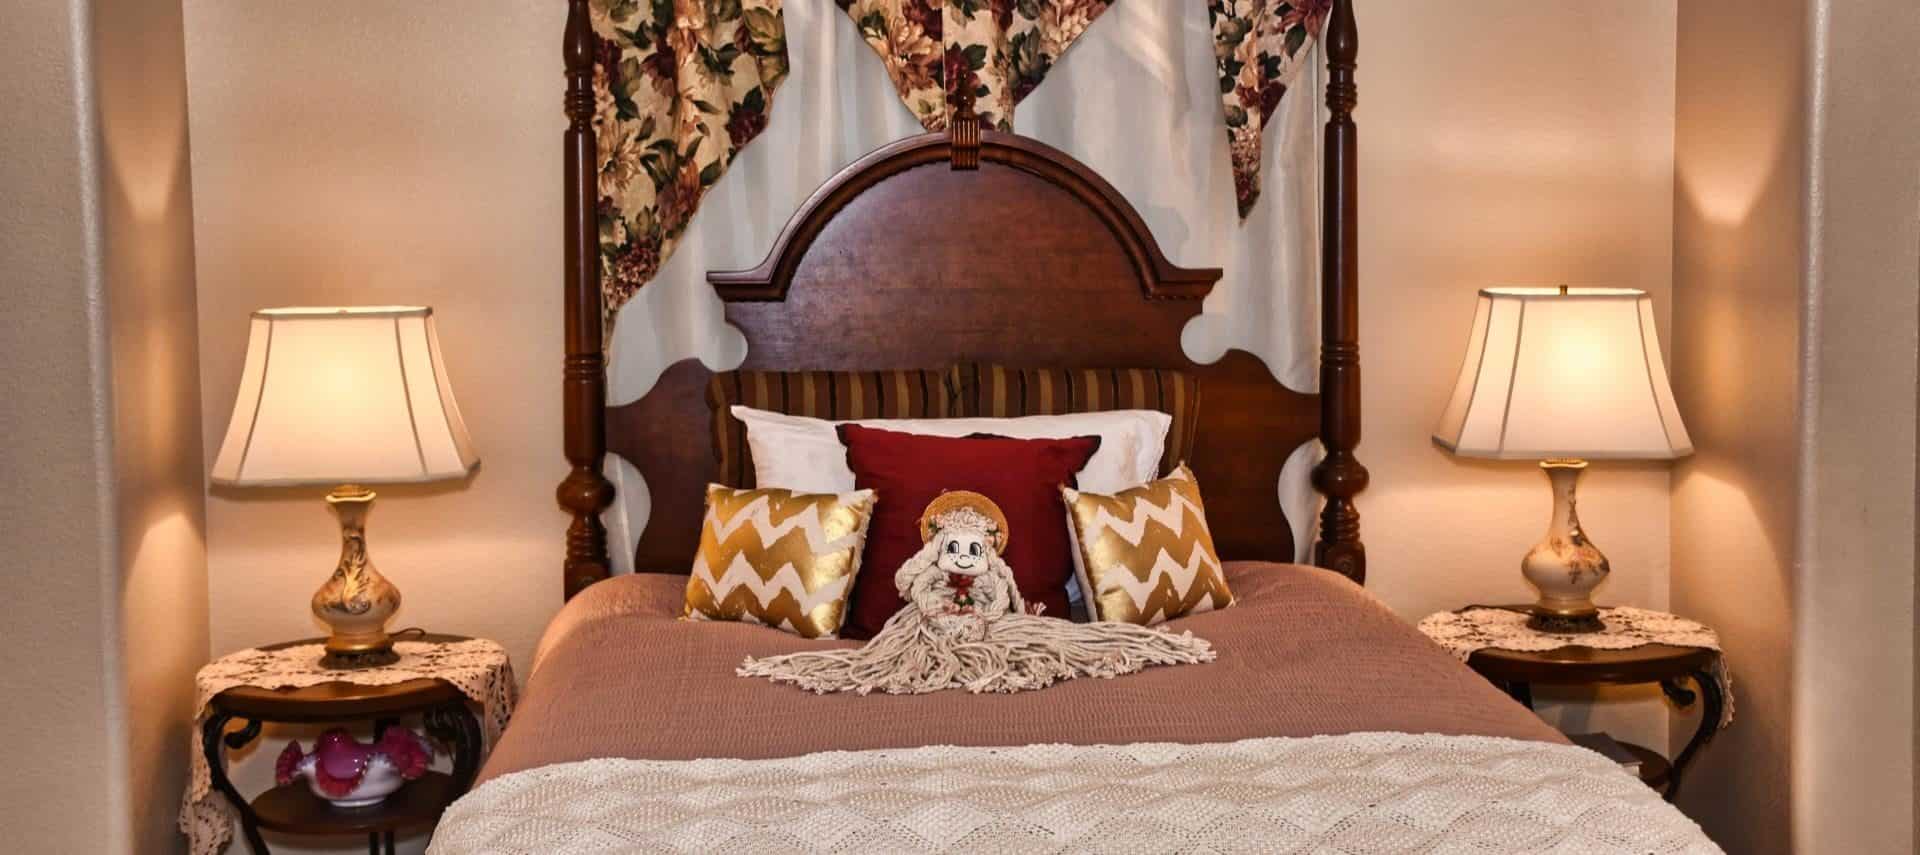 Bedroom with large dark wooden headboard with neutral bedding, white, red, and gold pillows, mop doll, and end tables with lamps